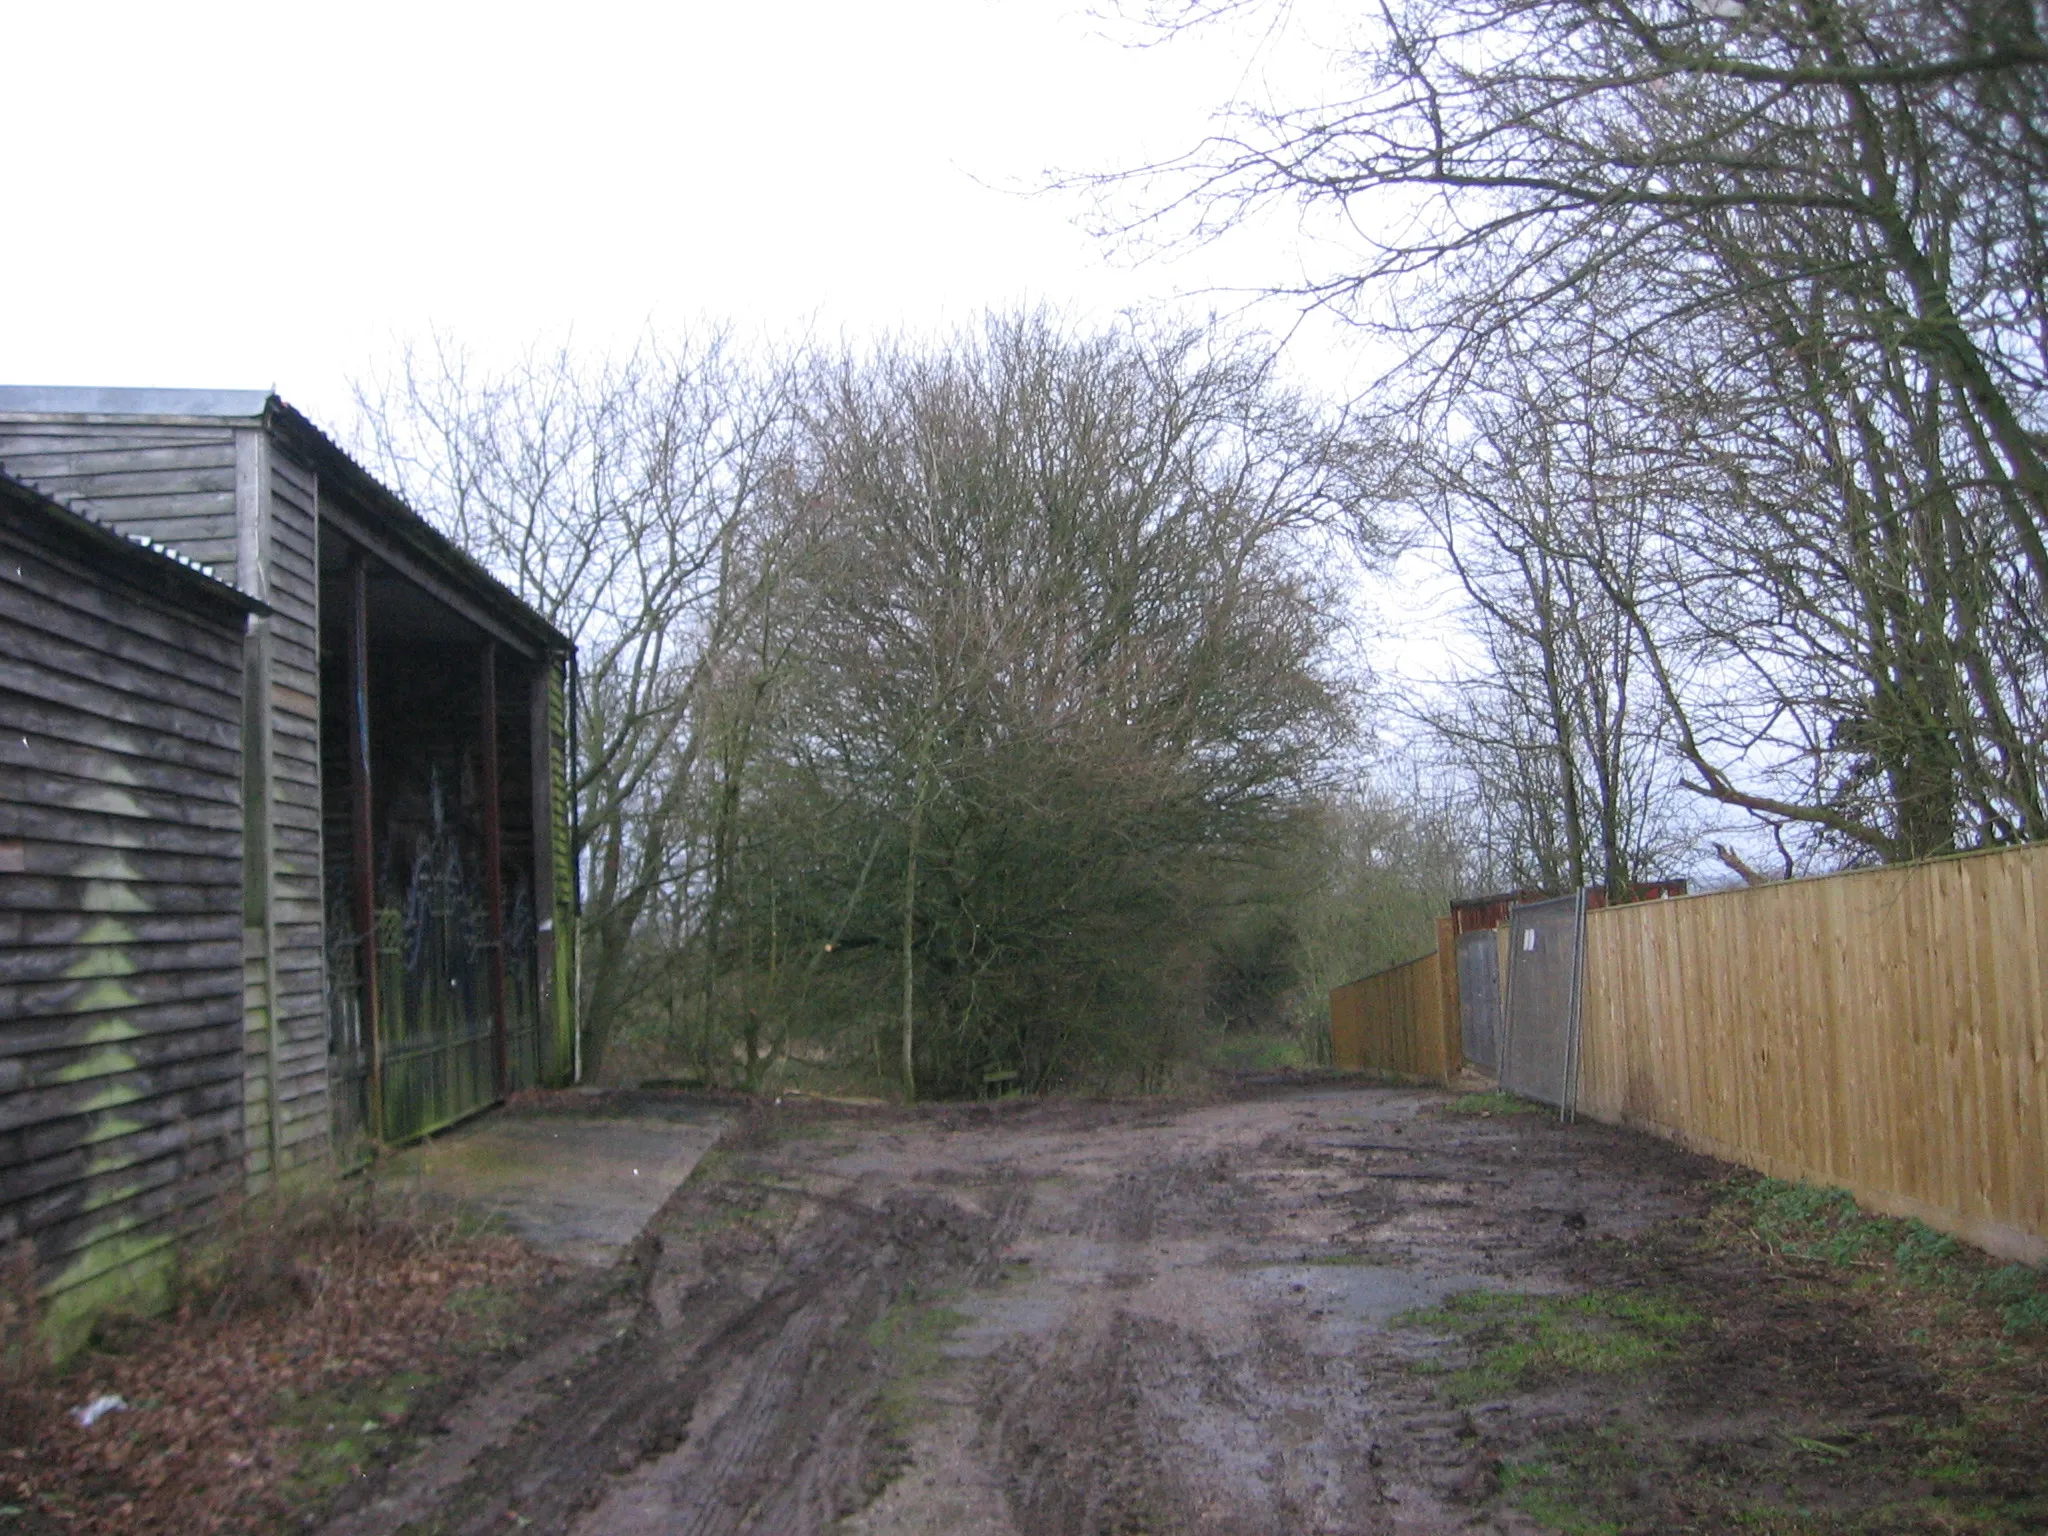 Photo showing: A muddy path and a garage with elaborate gates